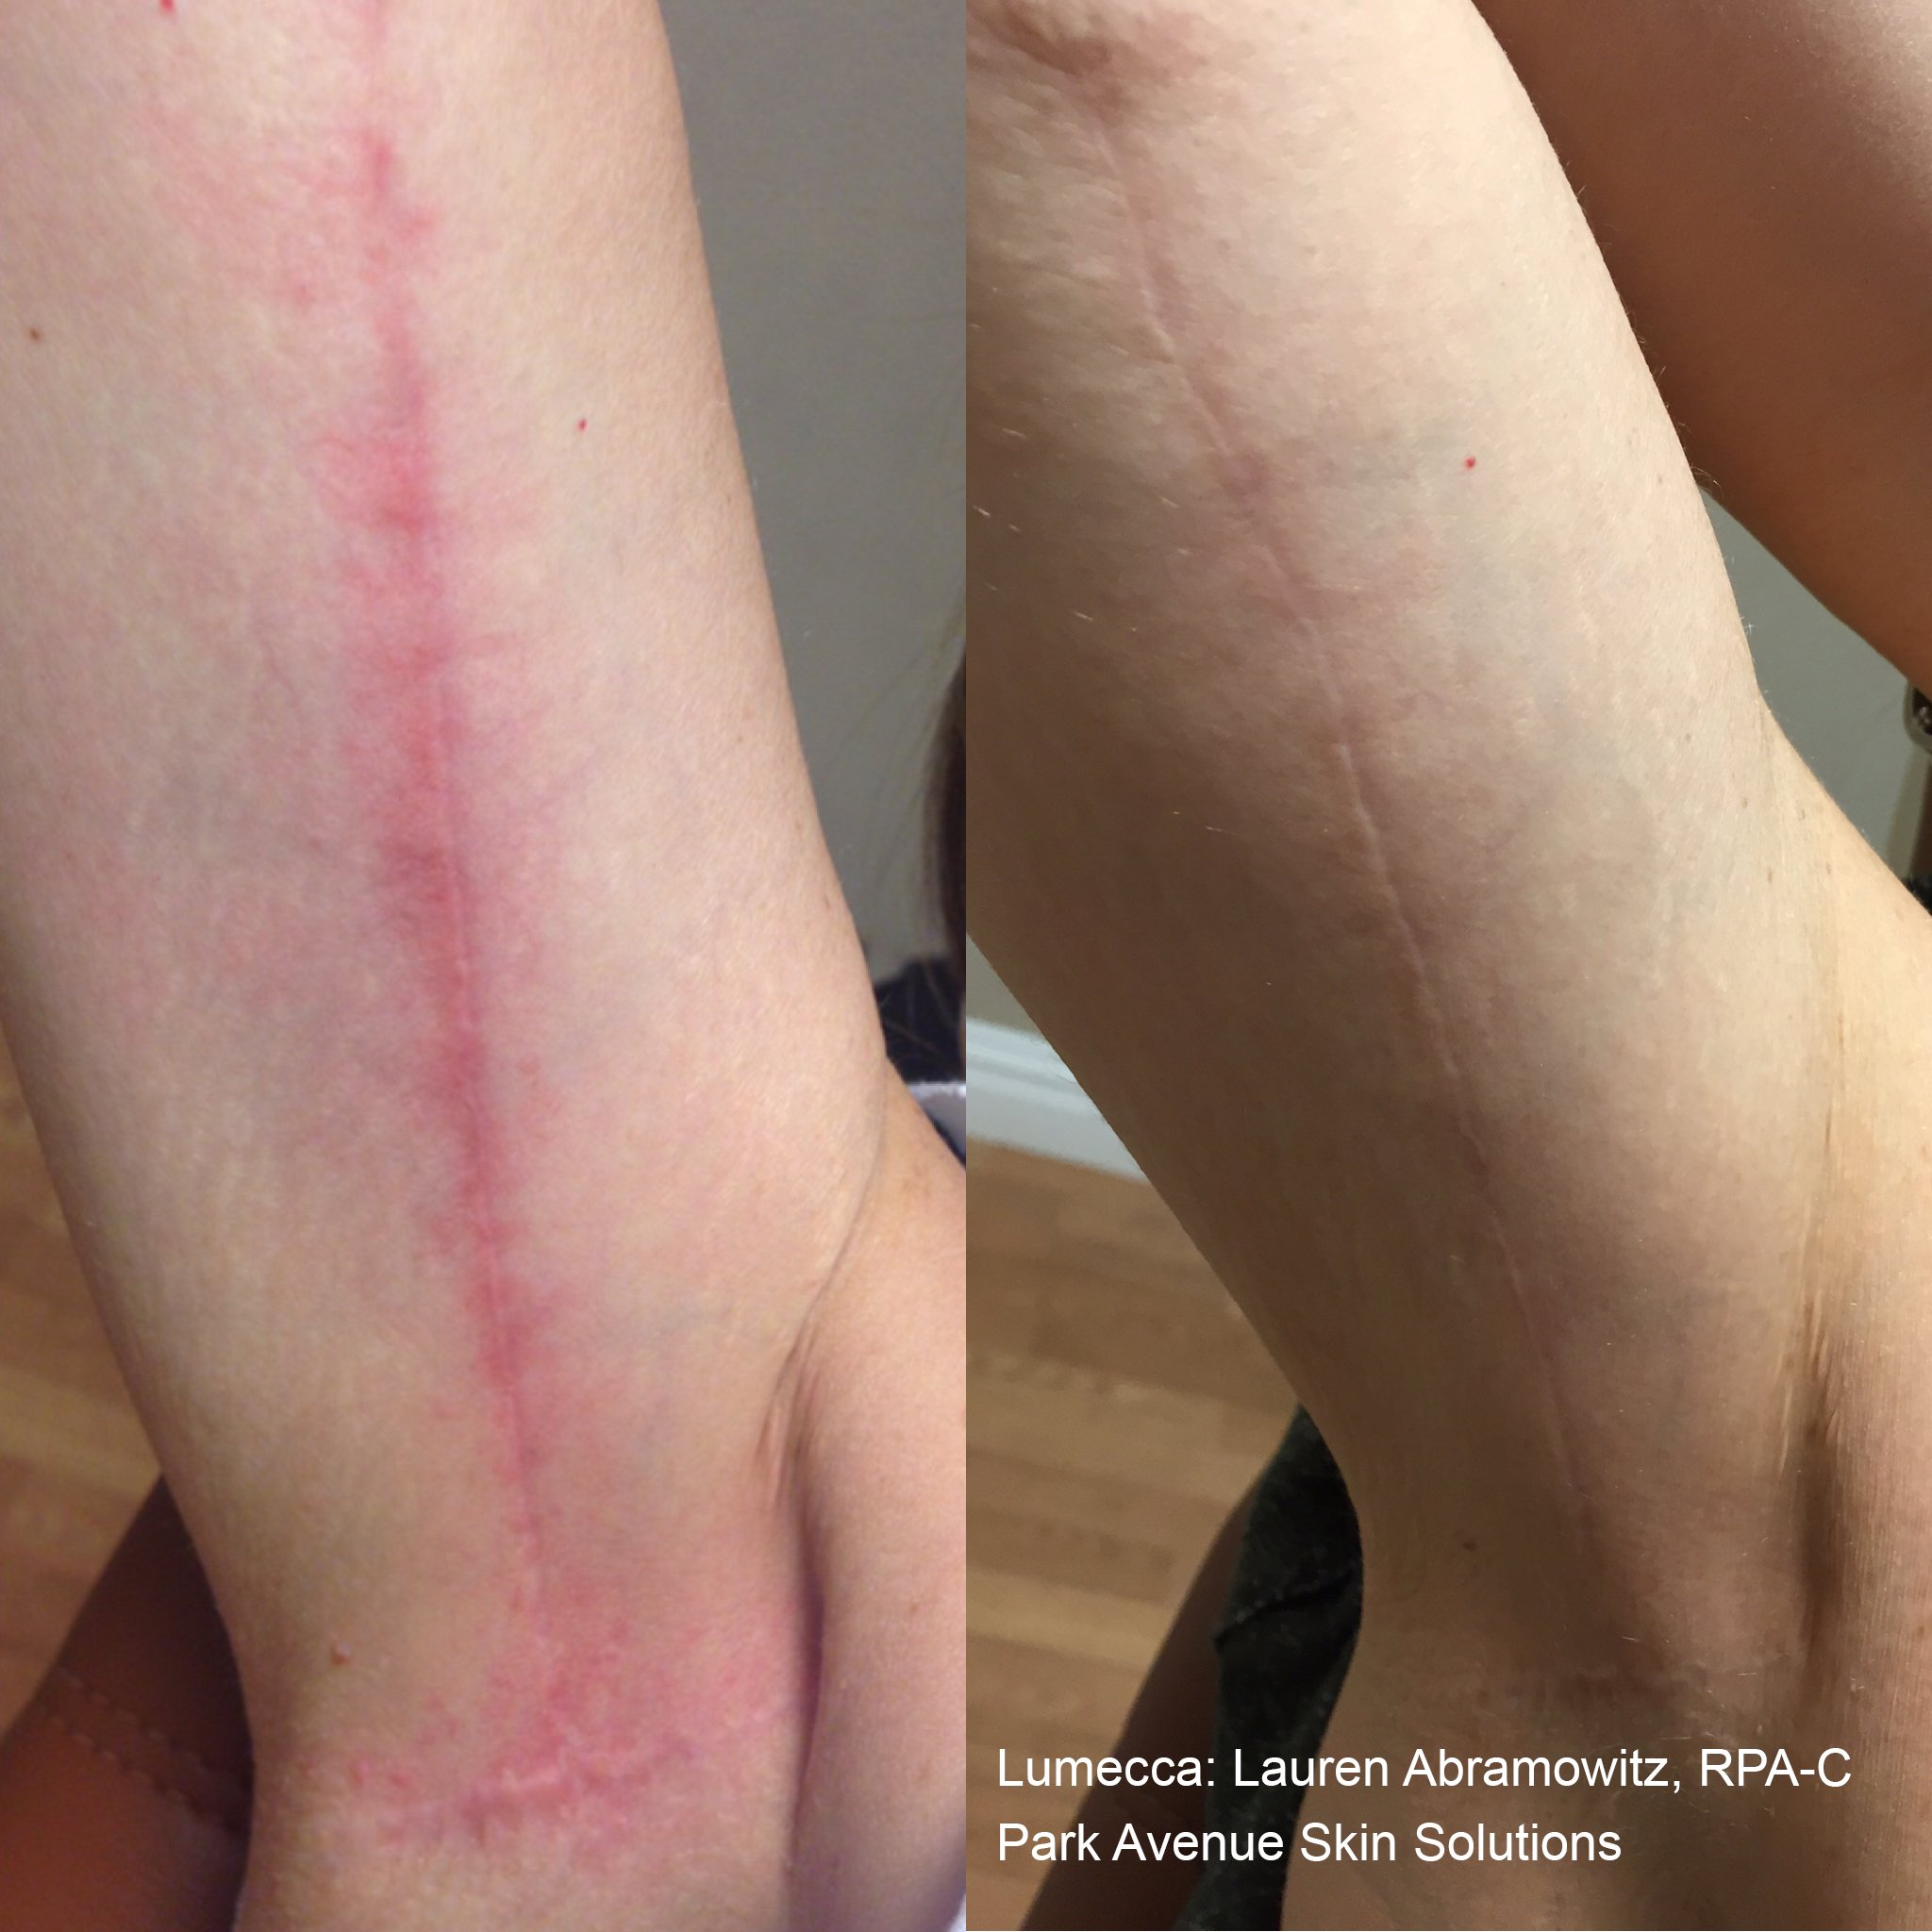 lumecca-before-after-lauren-abramowitz-rpa-c-park-avenue-skin-solutions-preview-1.jpg